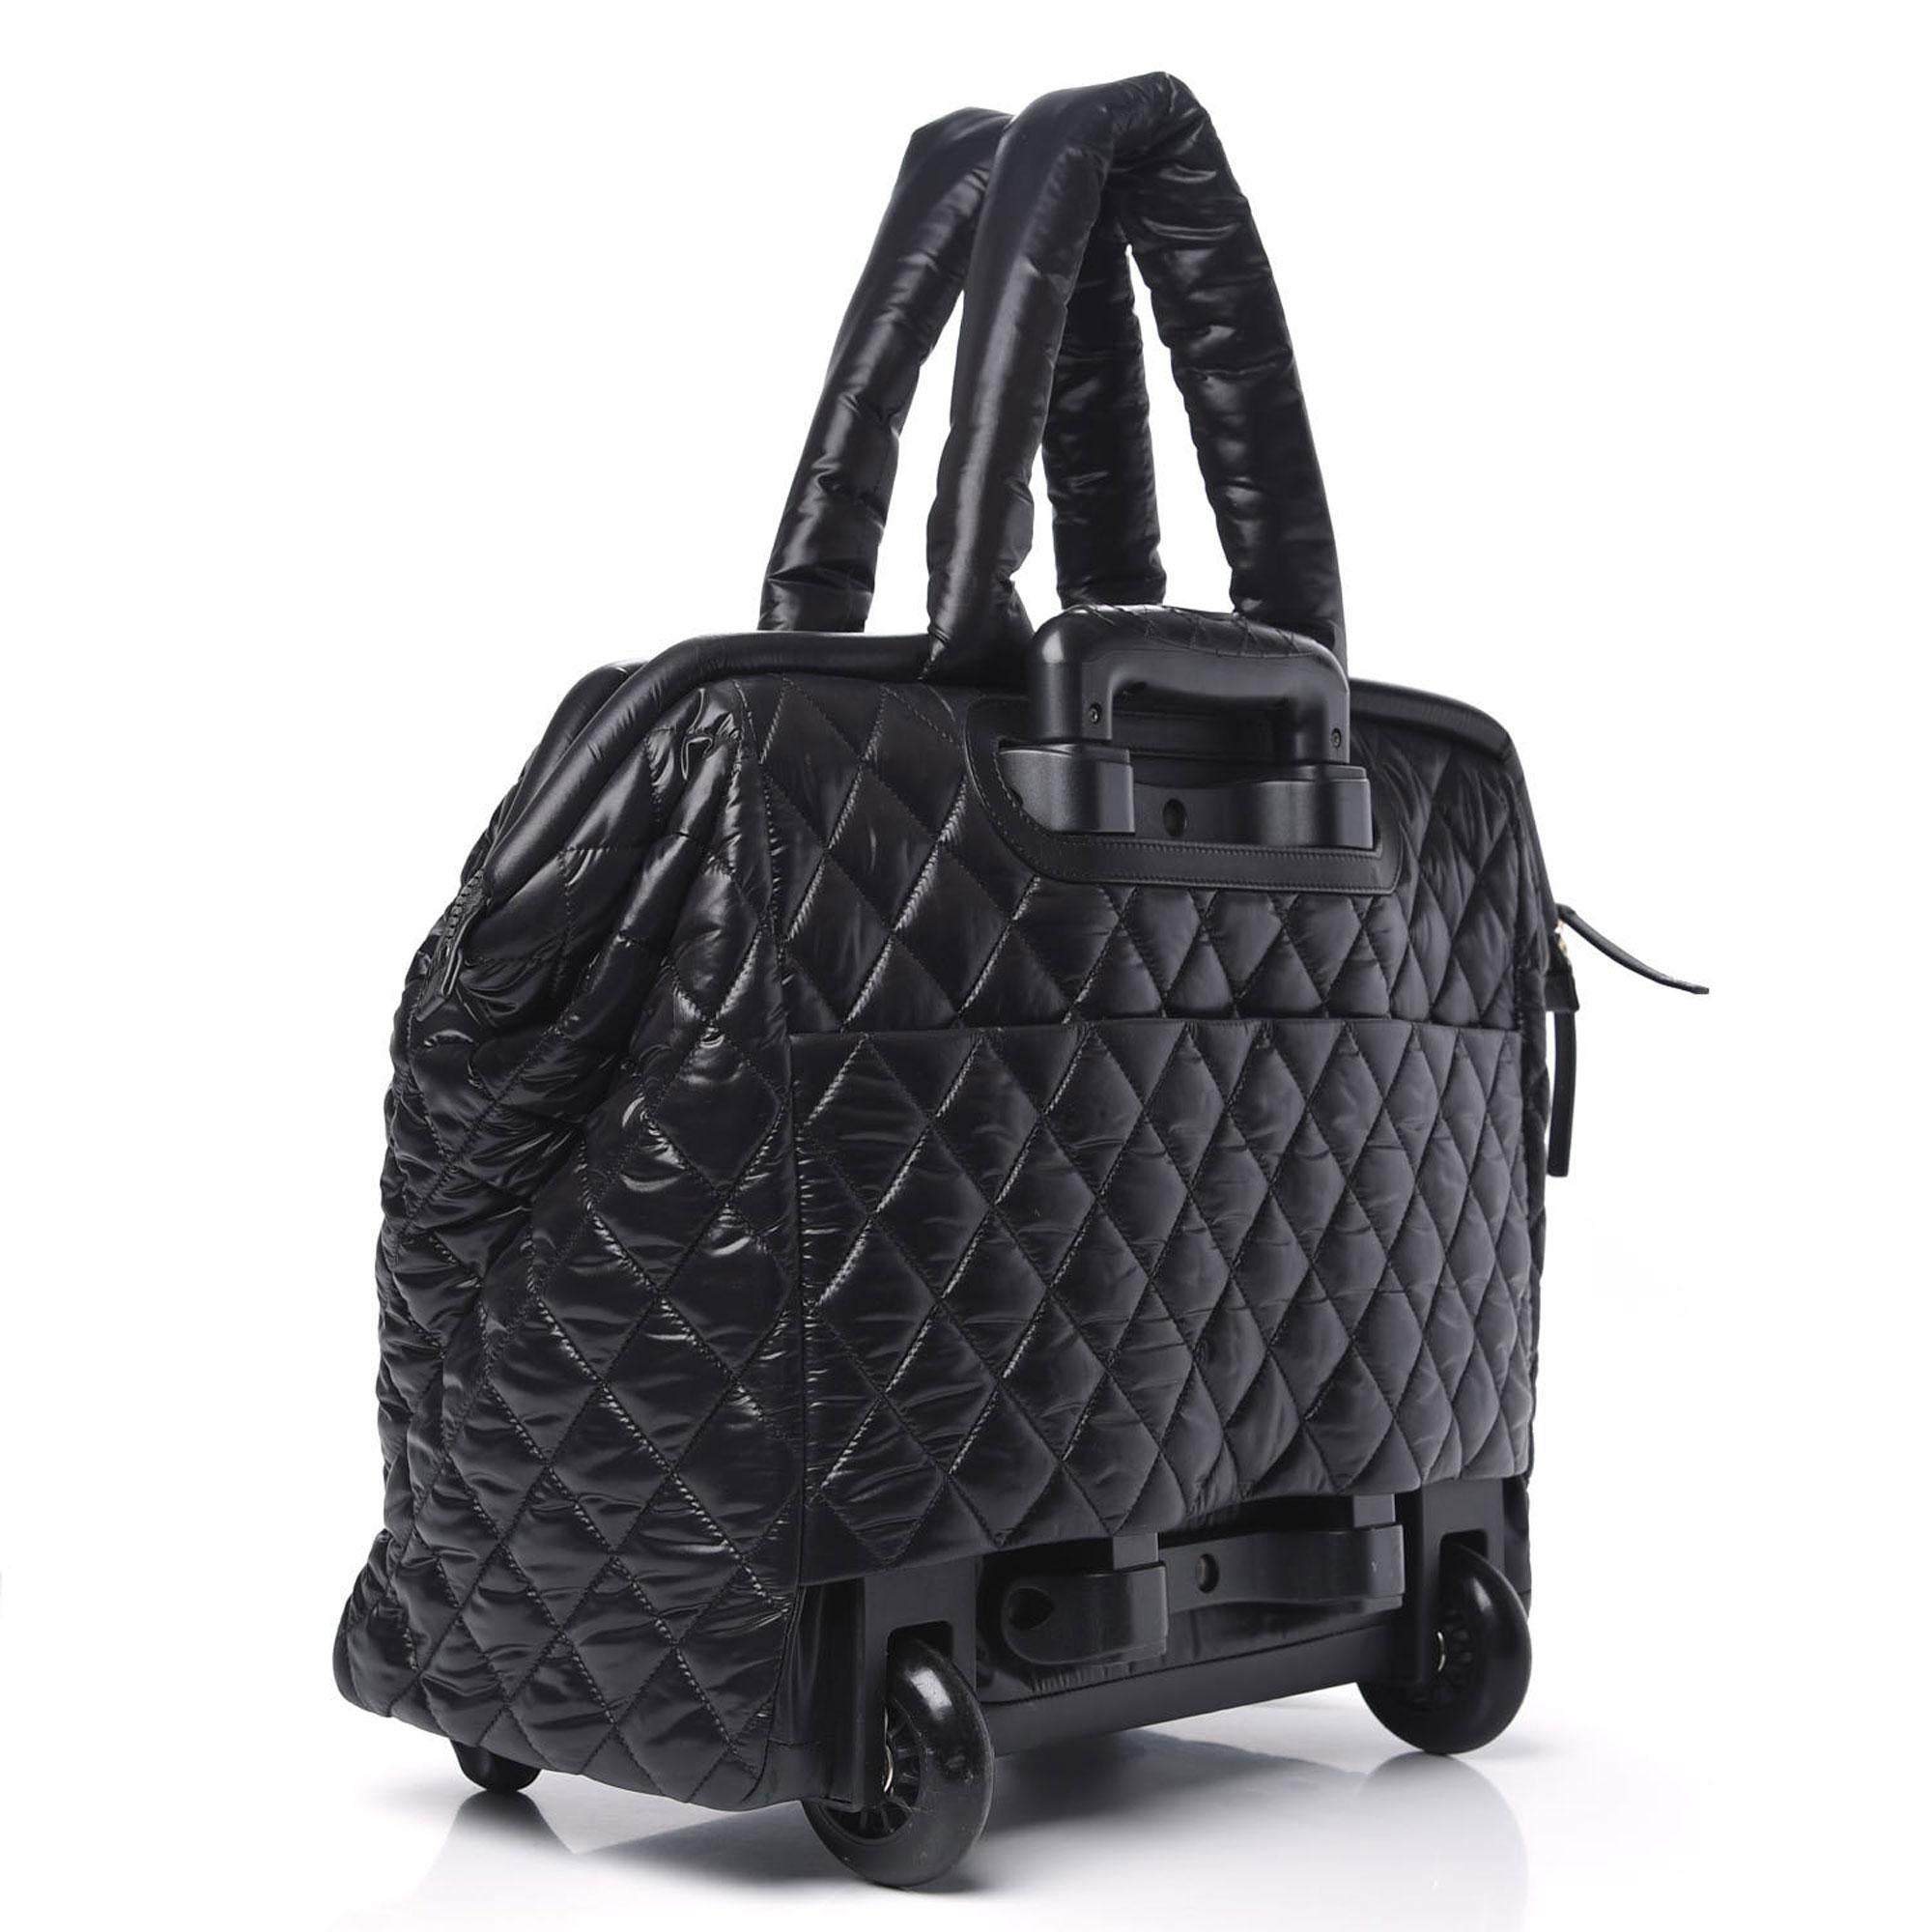 Chanel 2012 Coco Cocoon Quilted Case Carry On Trolley Travel Black Luggage Bag 6